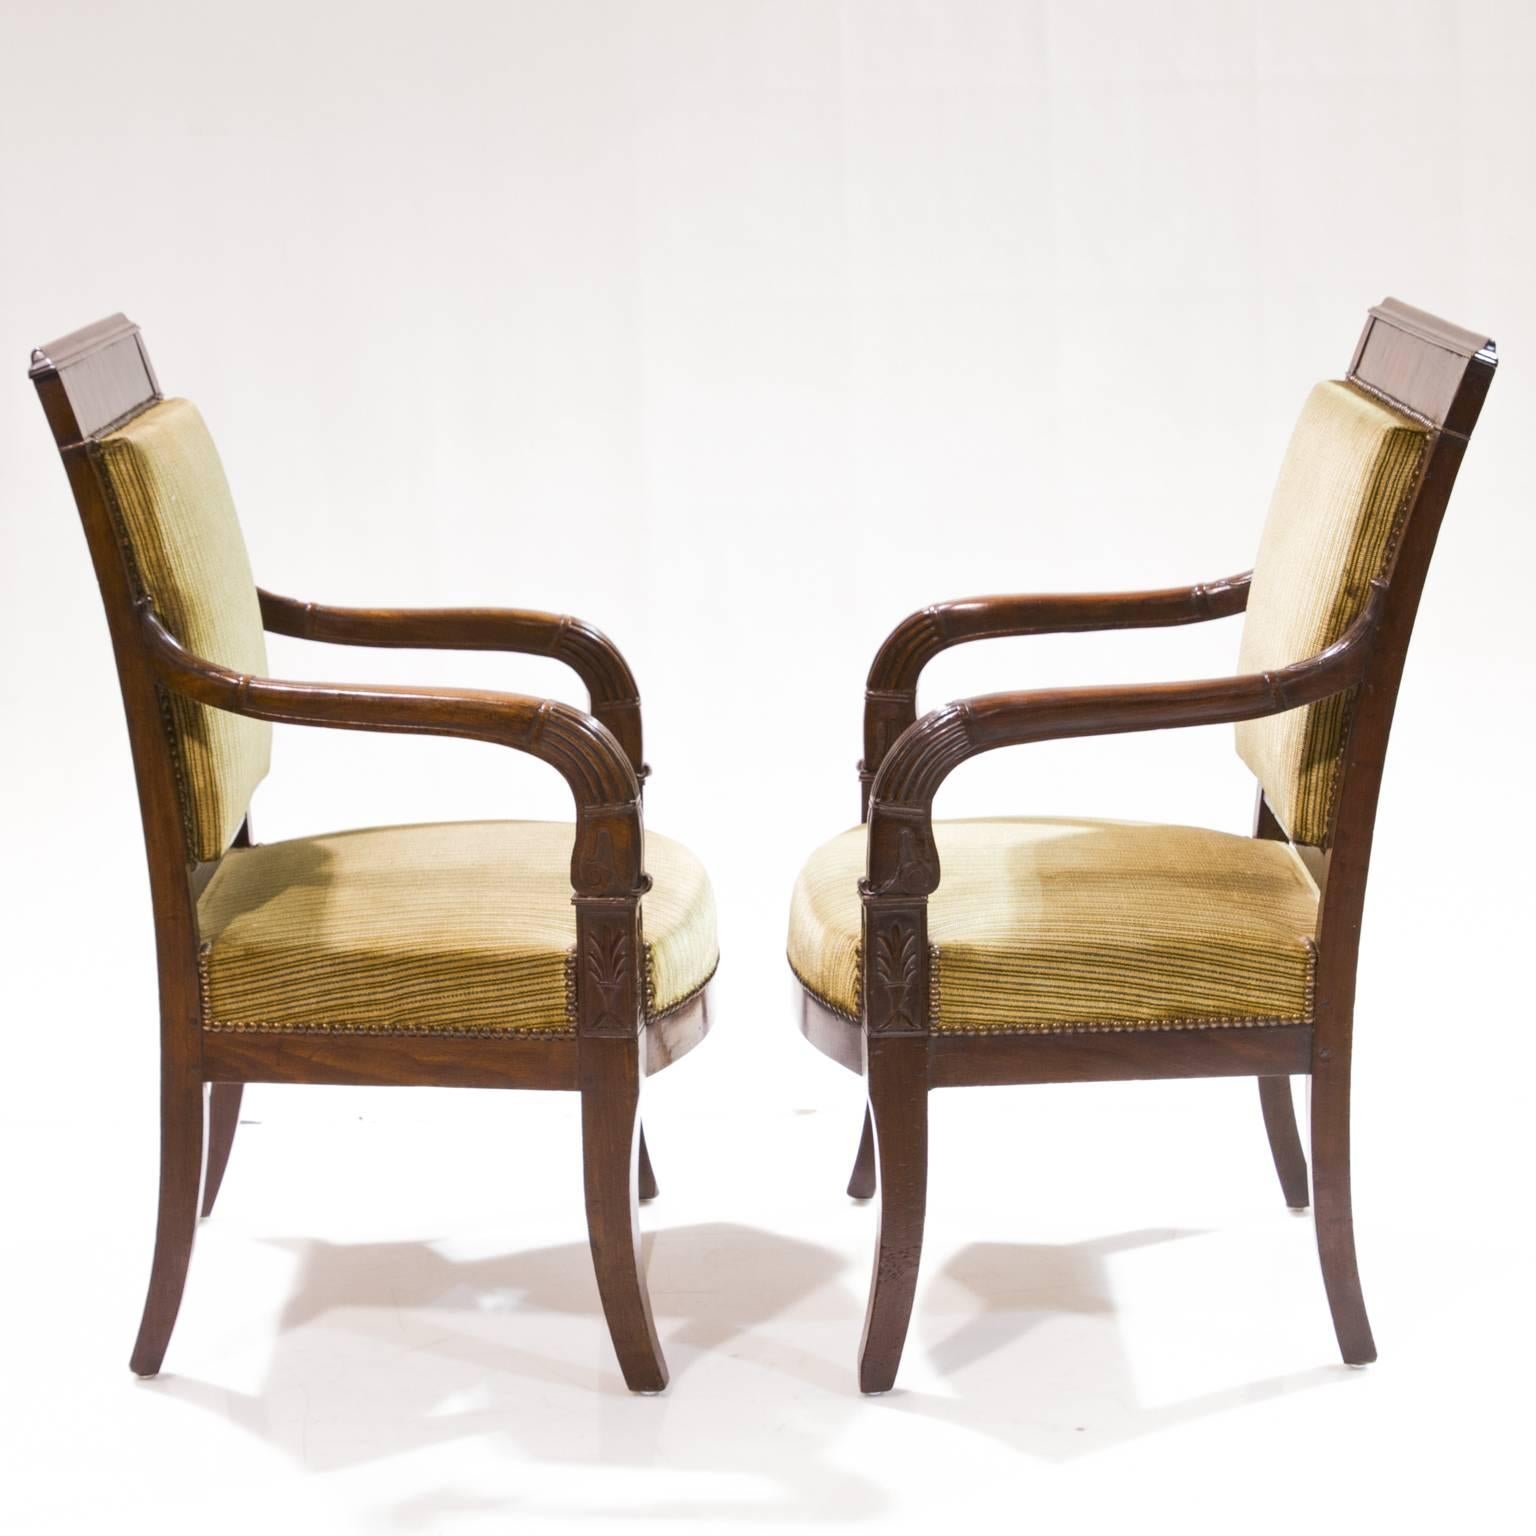 A magnificent pair of French Empire mahogany open-arm chairs from the early 19th century. A fine French polish adorns the wood and give rich depth to the look of the wood. Pegged joints proper carvings. Notice the flow of the carvings on the arm,